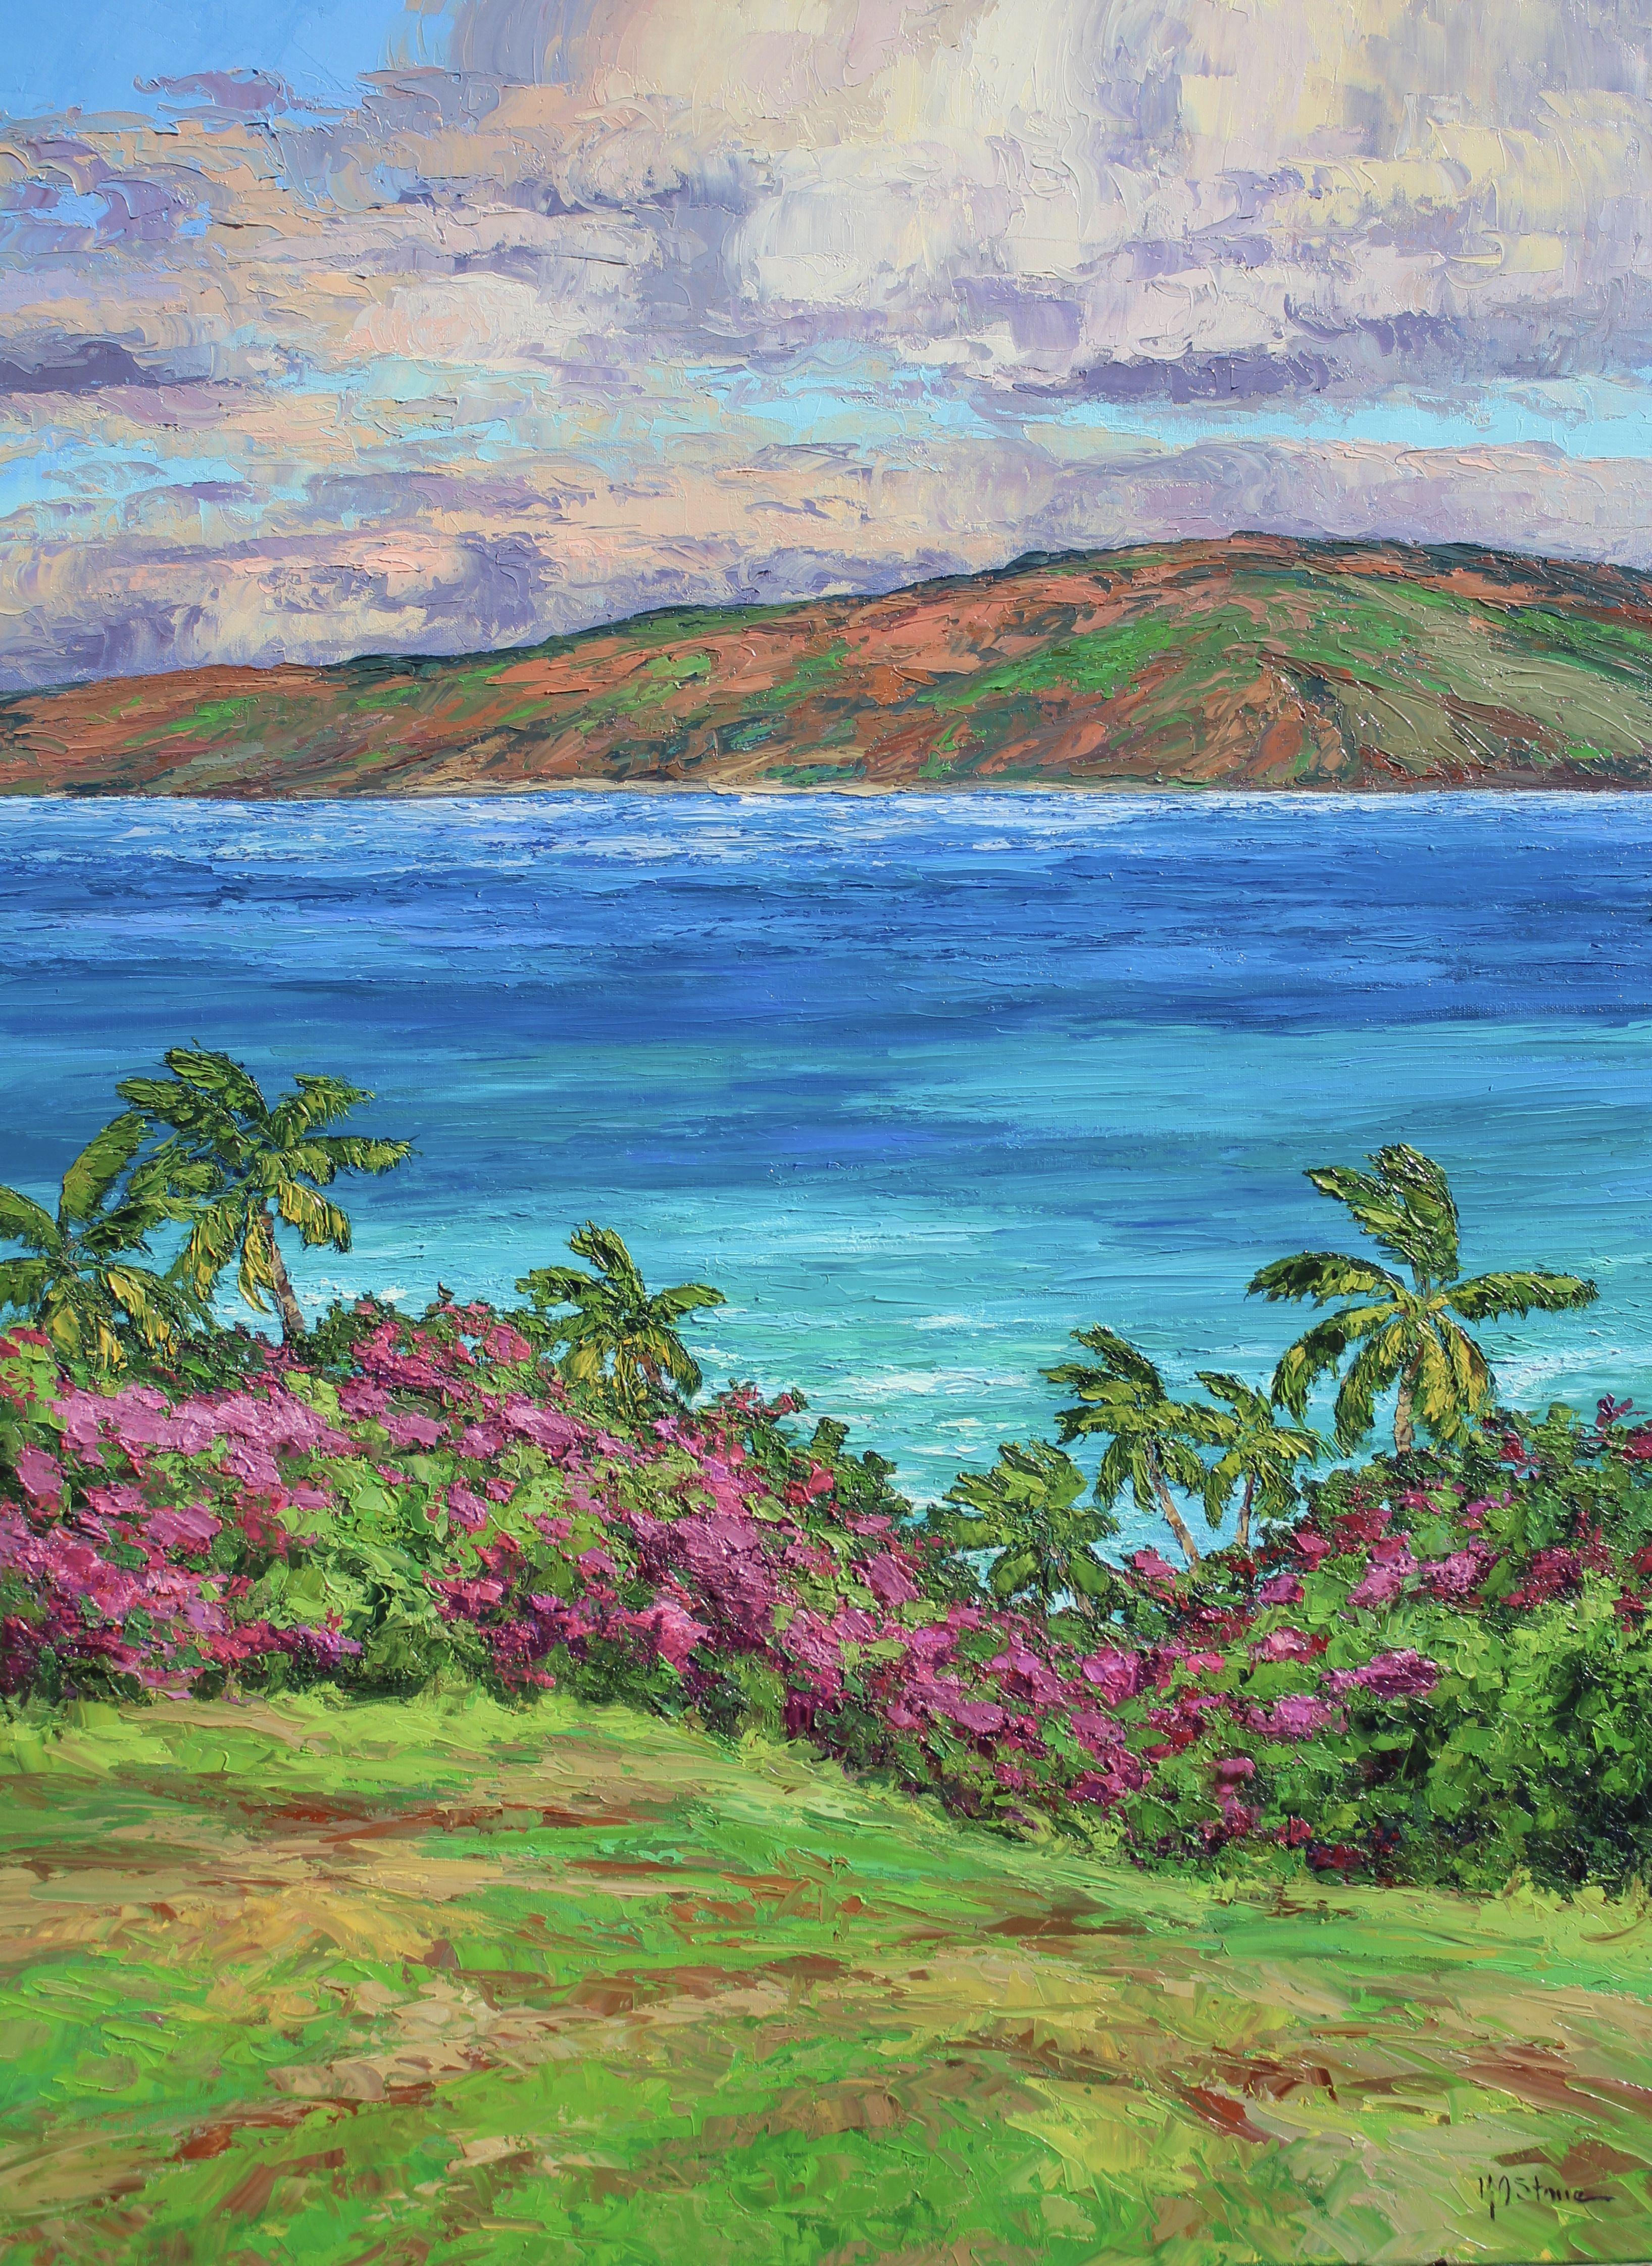 An original palette knife oil painting of upcountry Maui. This view from Paia looks toward Kahoolawe which is painted with streaks of red lava interspersed with green foliage, waves lap the distant shore and gorgeously colored, towering clouds hang